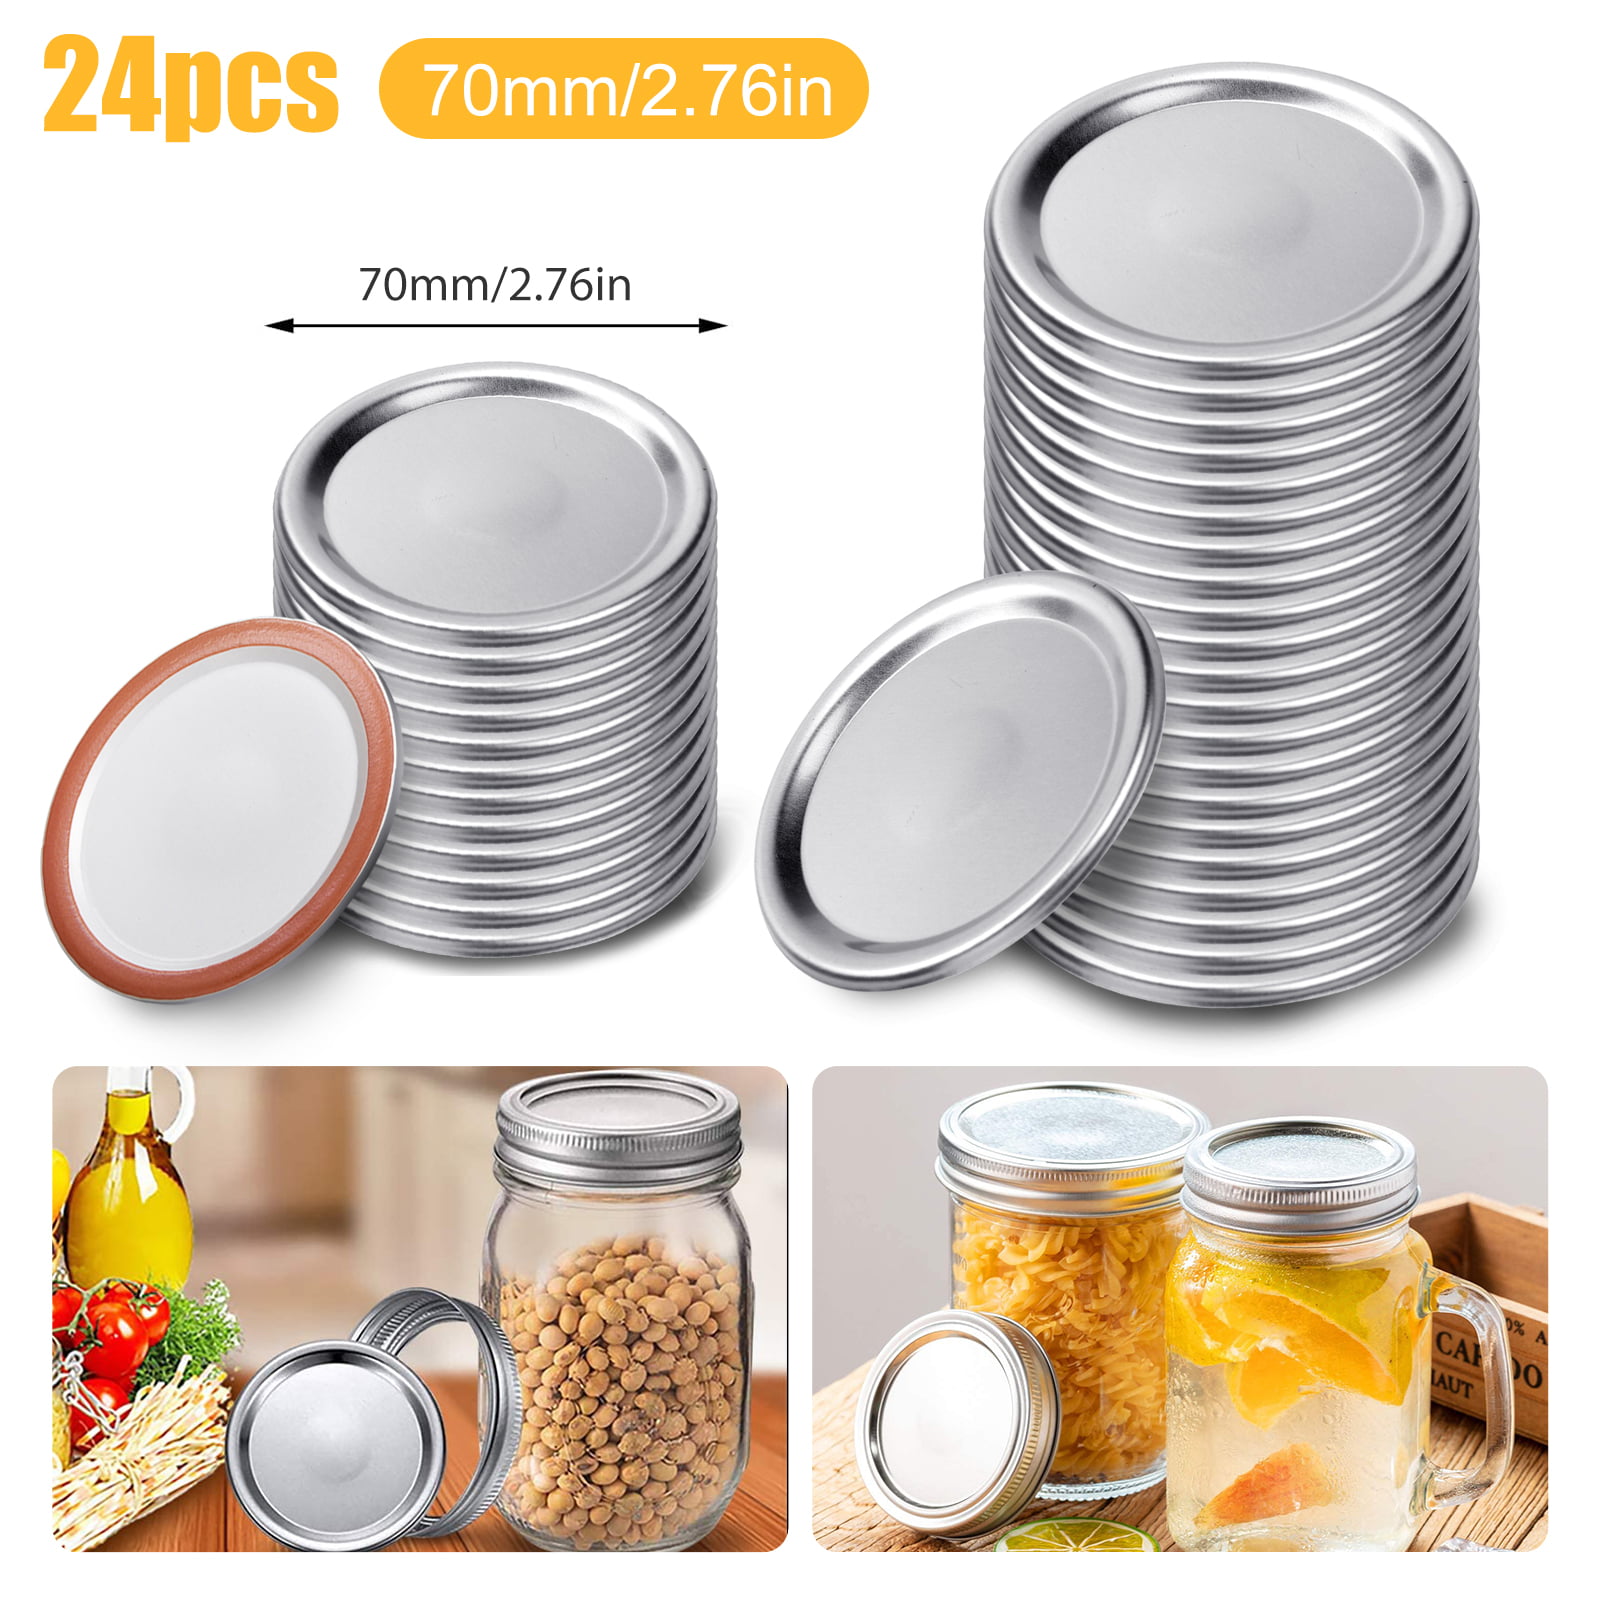 Canning Lids Mason Jar Lids and Bands with Regular Mouth Stainless Steel Lids Leak-Proof and Secure Canning Storage Caps 